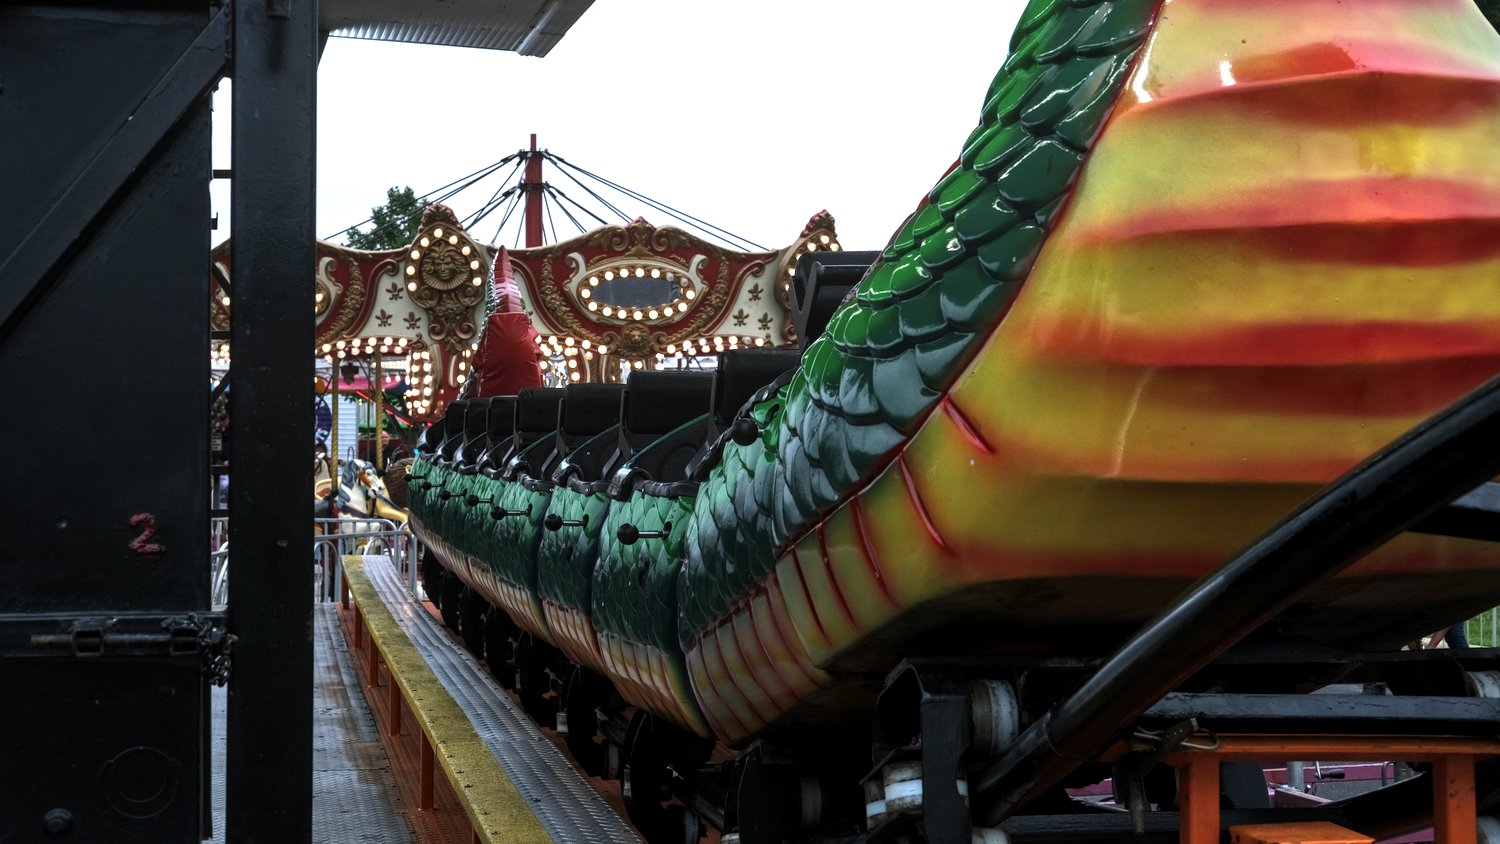 Dragon ride with empty seats.